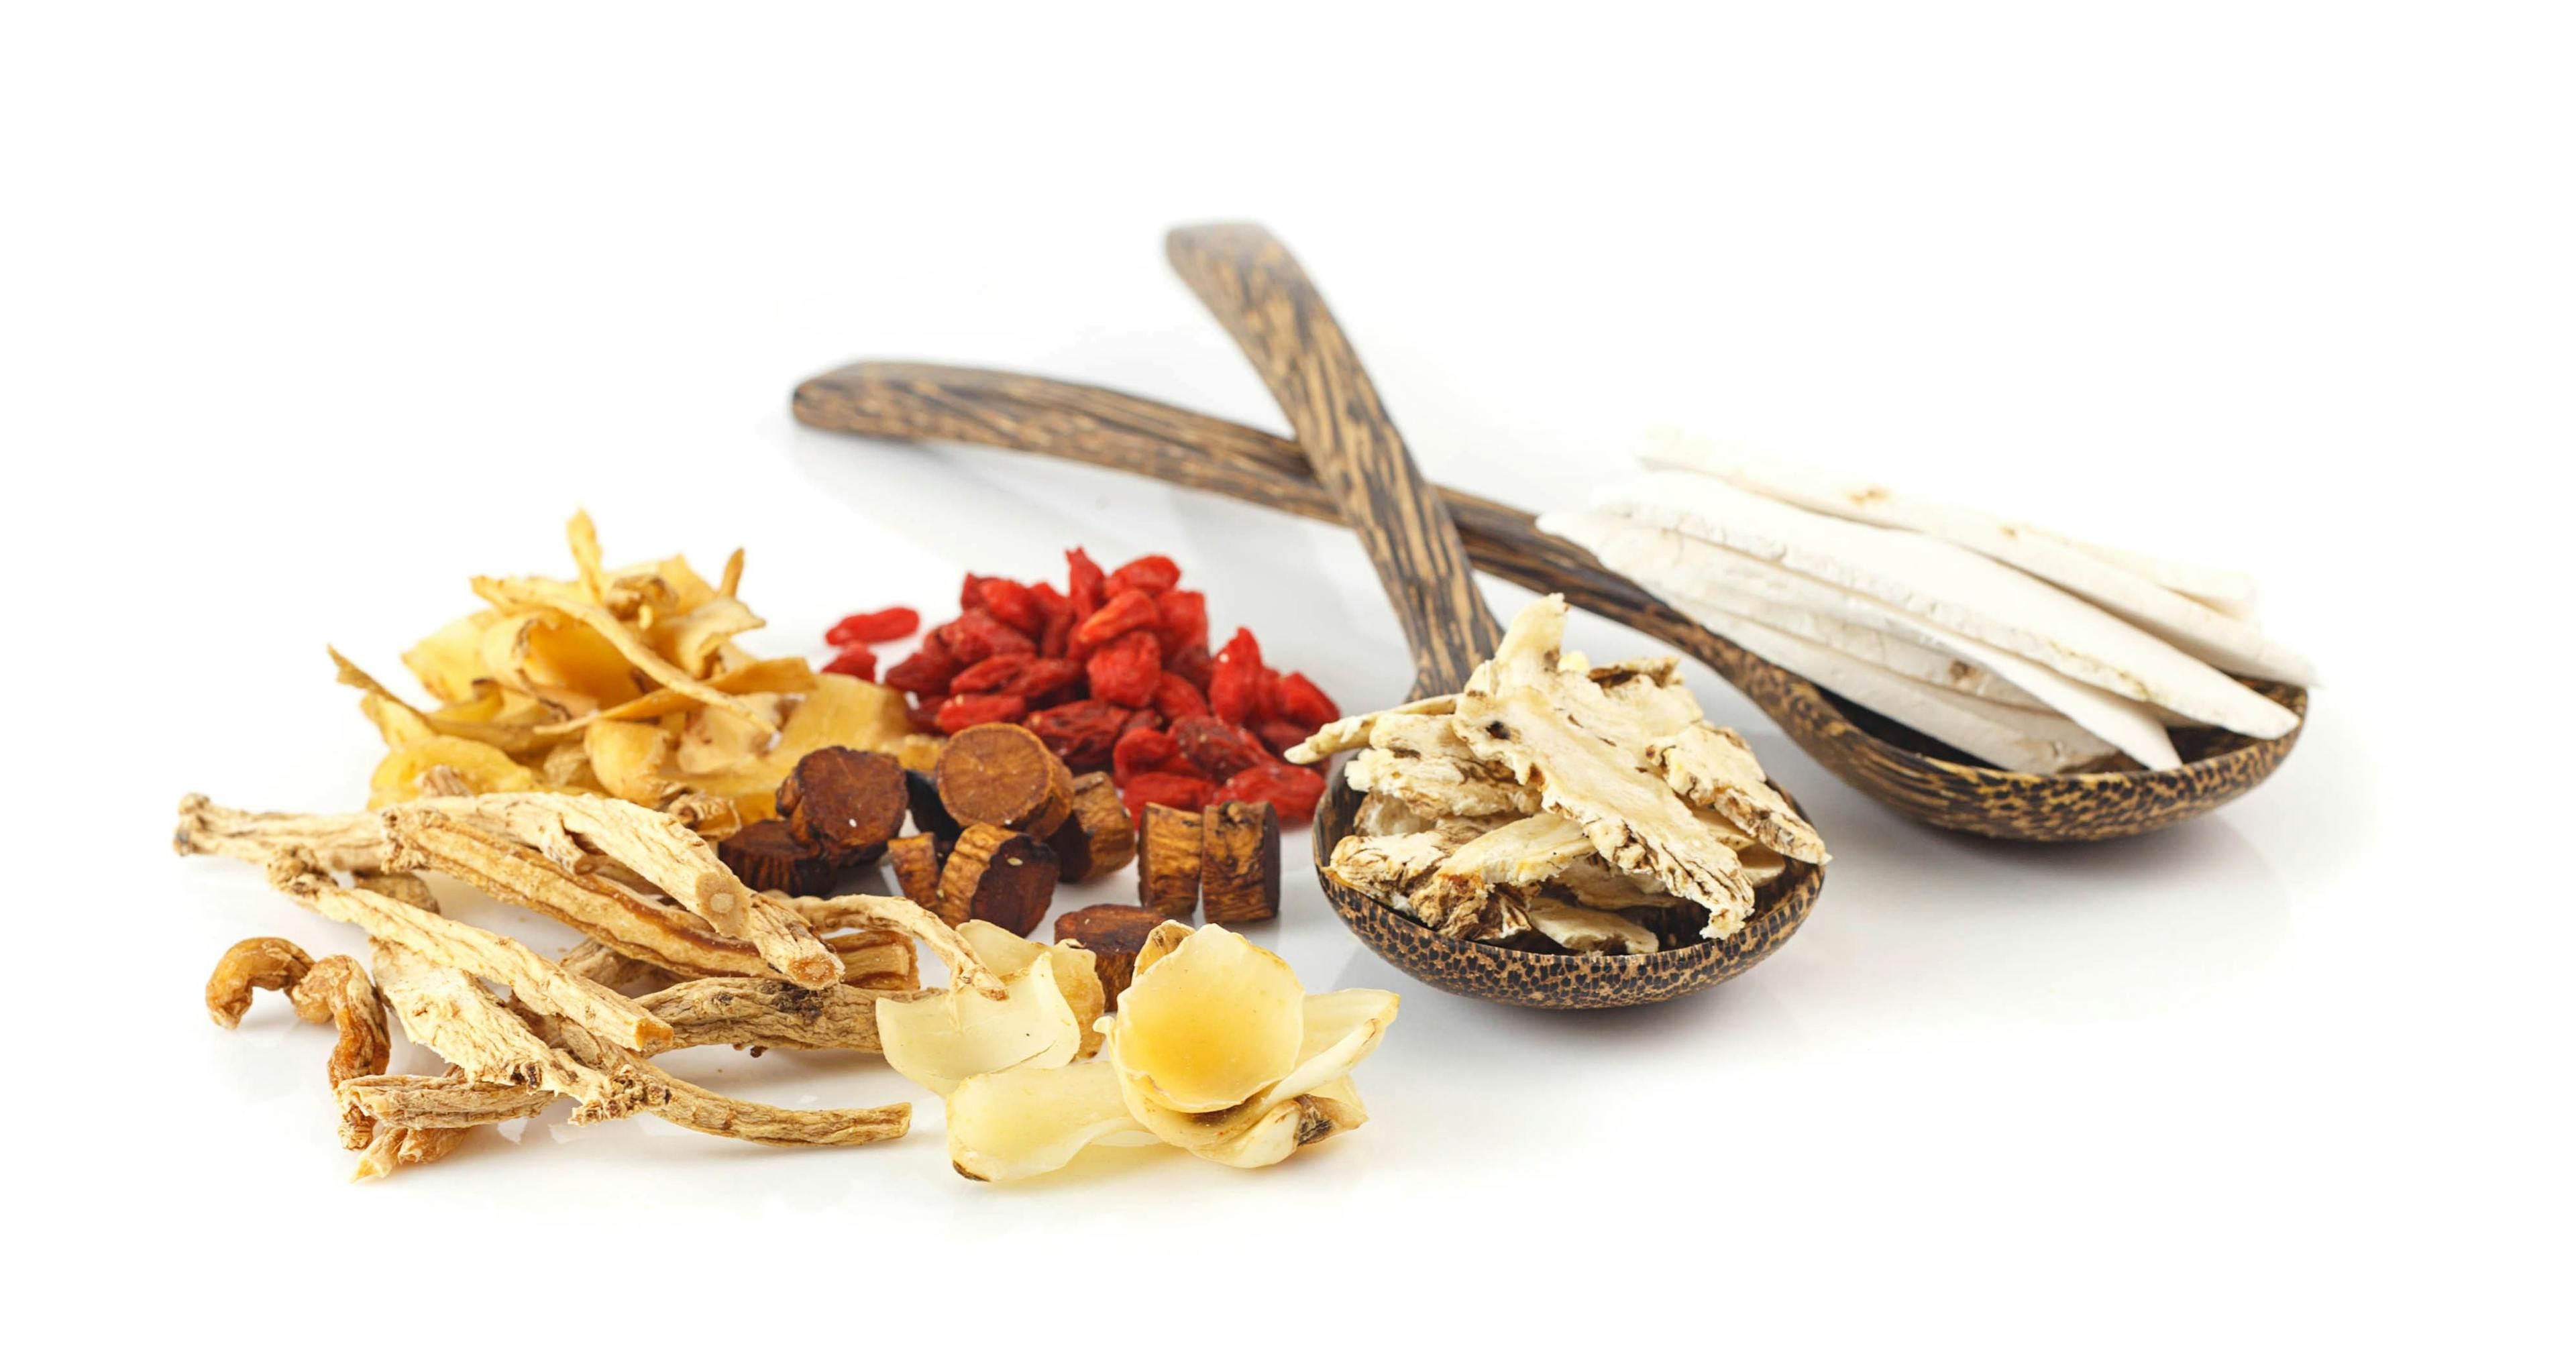 Group of chinese medicine herbs By banprik - stock.adobe.com